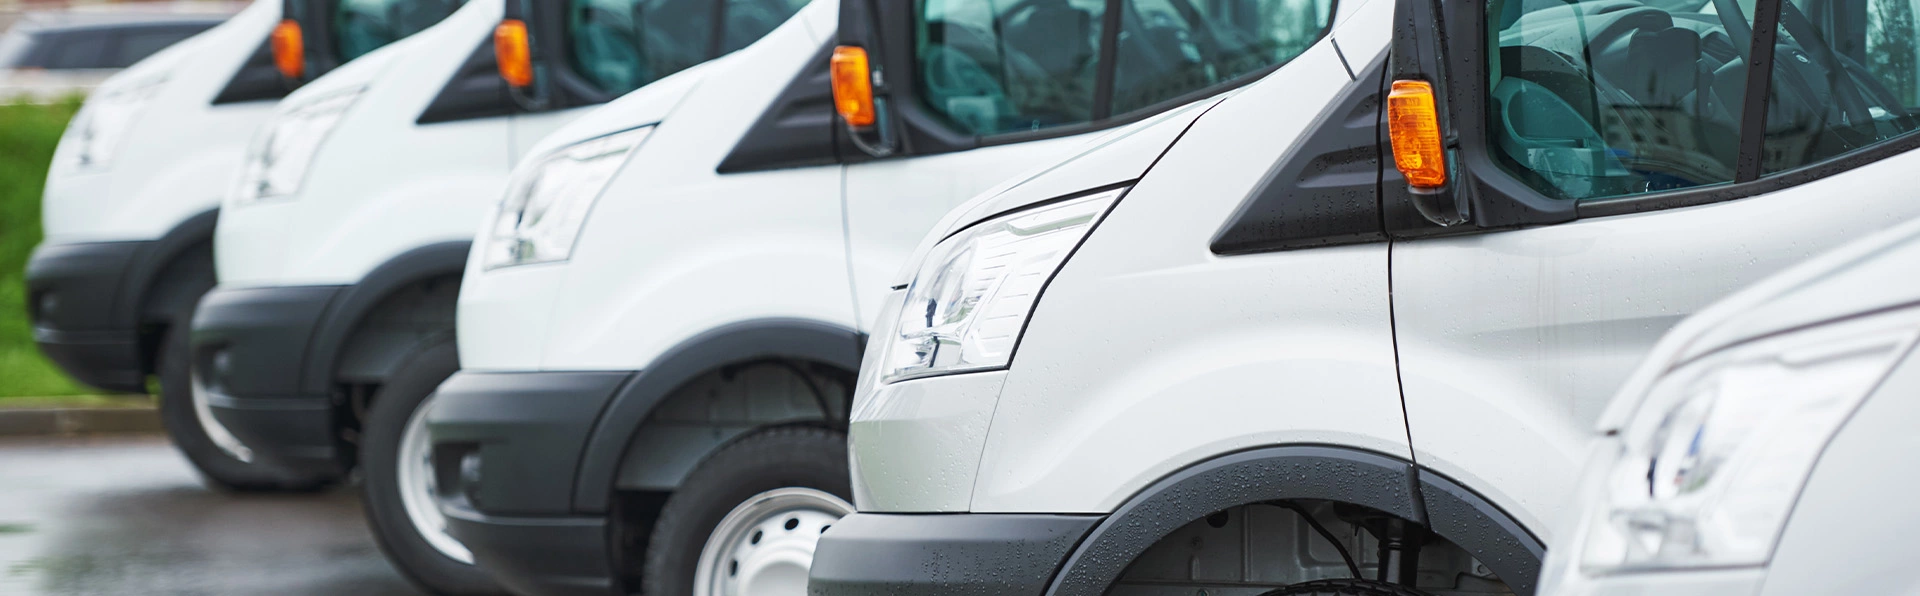 What Are the Benefits of Leasing a Fleet of Vans?